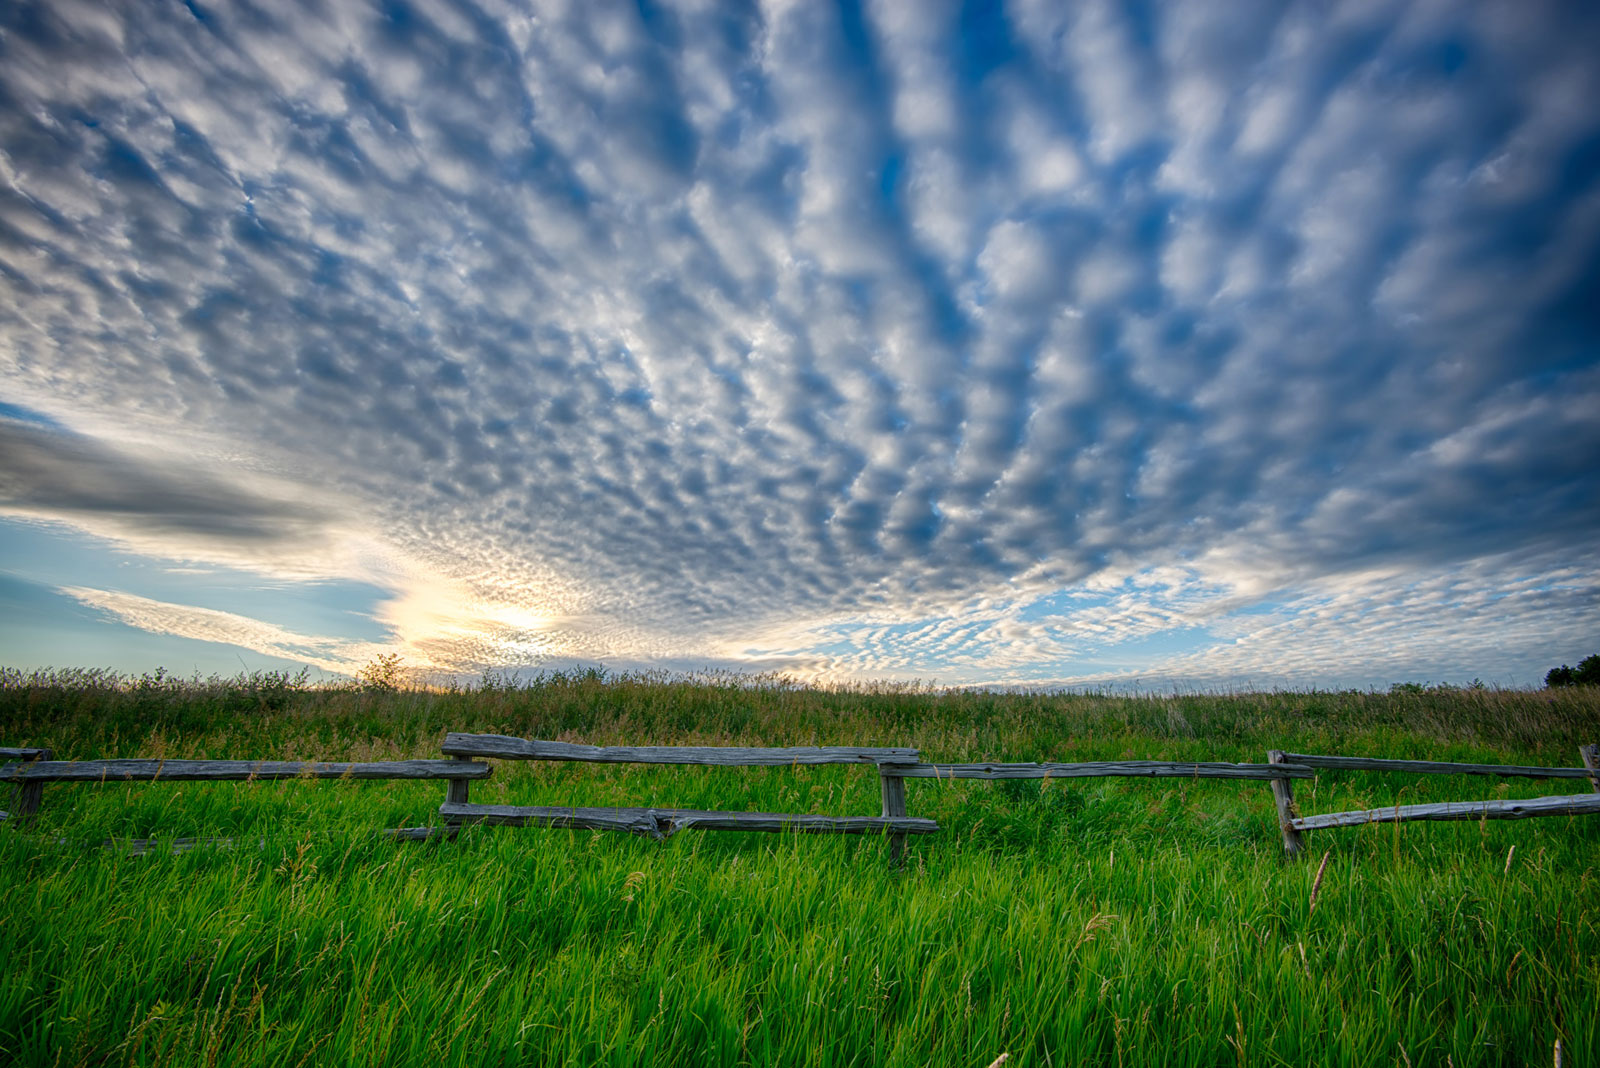 lush green grass and an old wooden fence under a dramatic sky